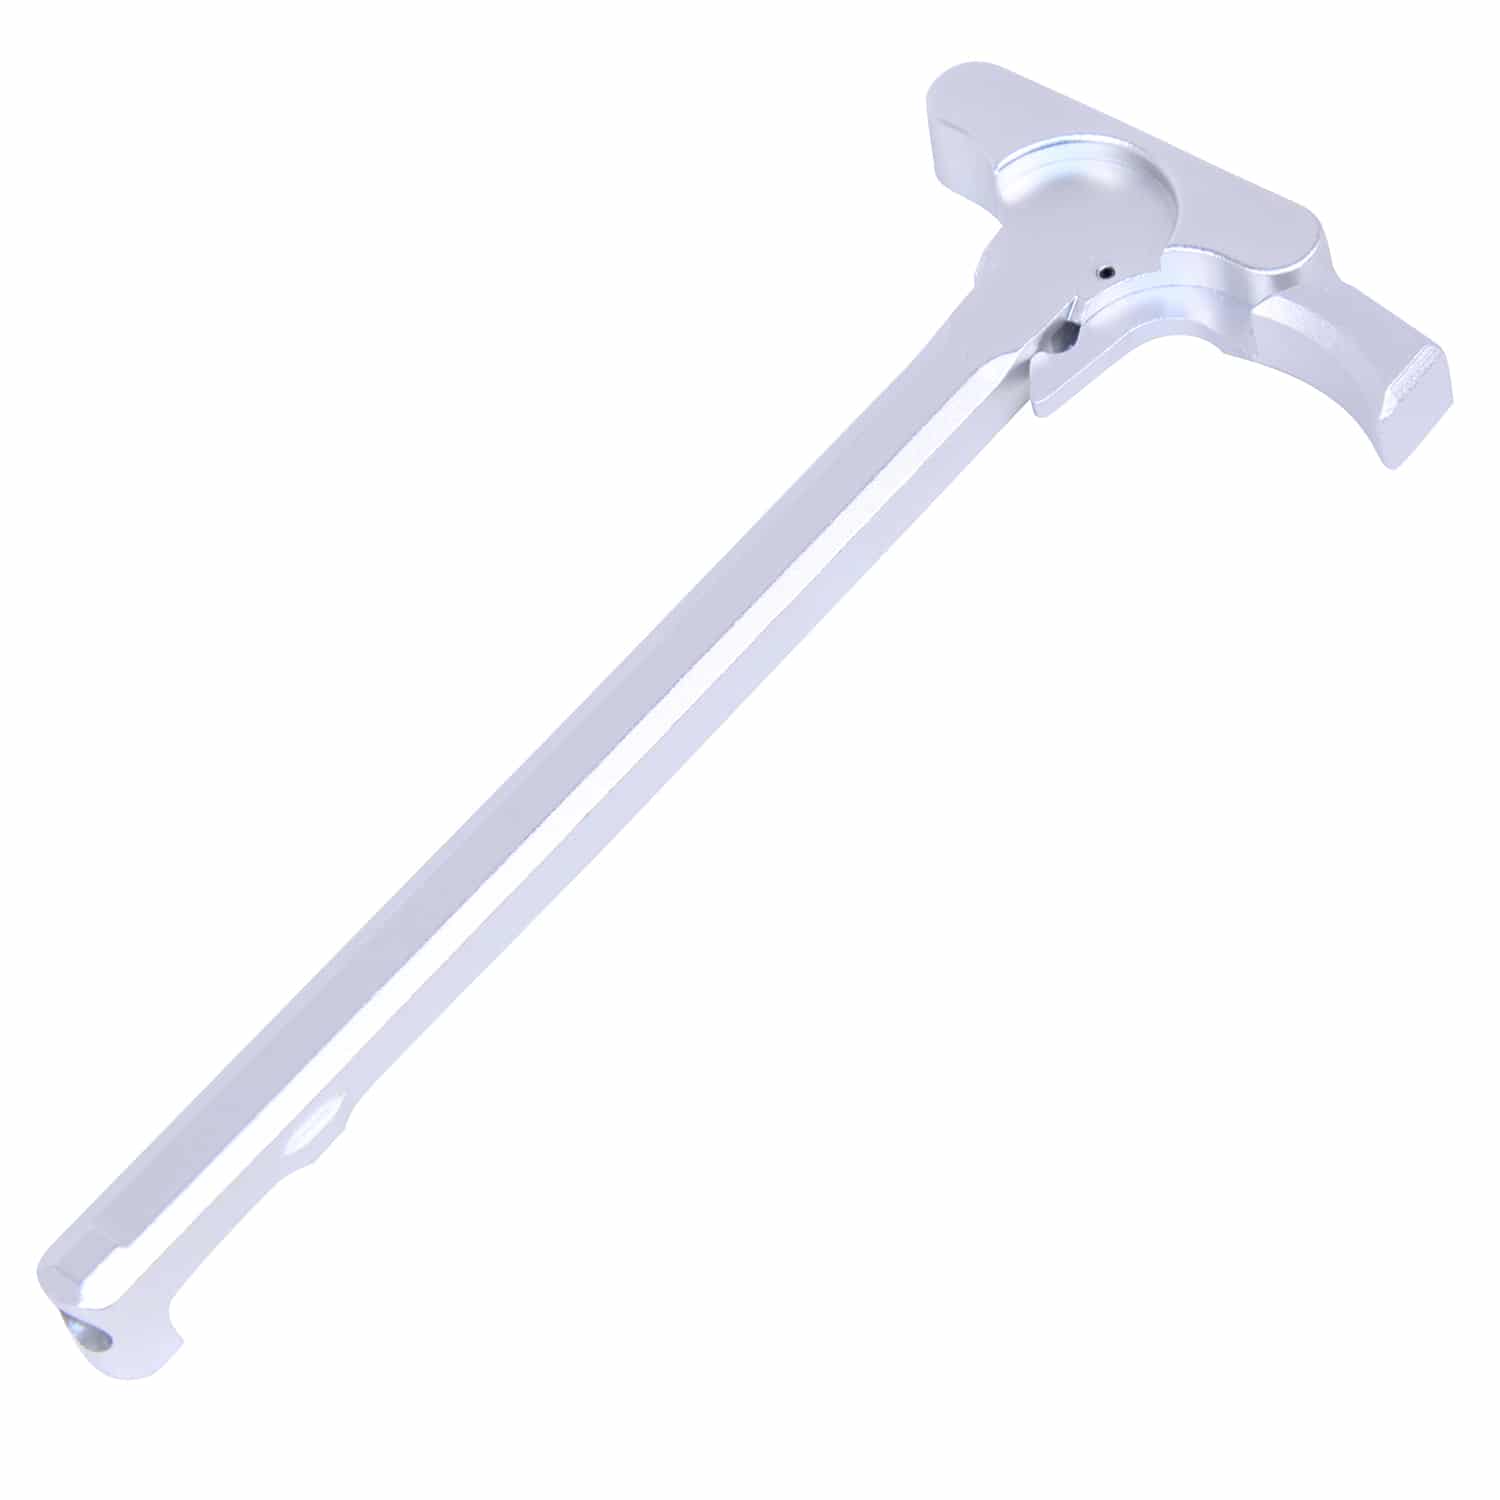 AR-15 Charging Handle With Gen 5 Latch in Anodized Clear Aluminum